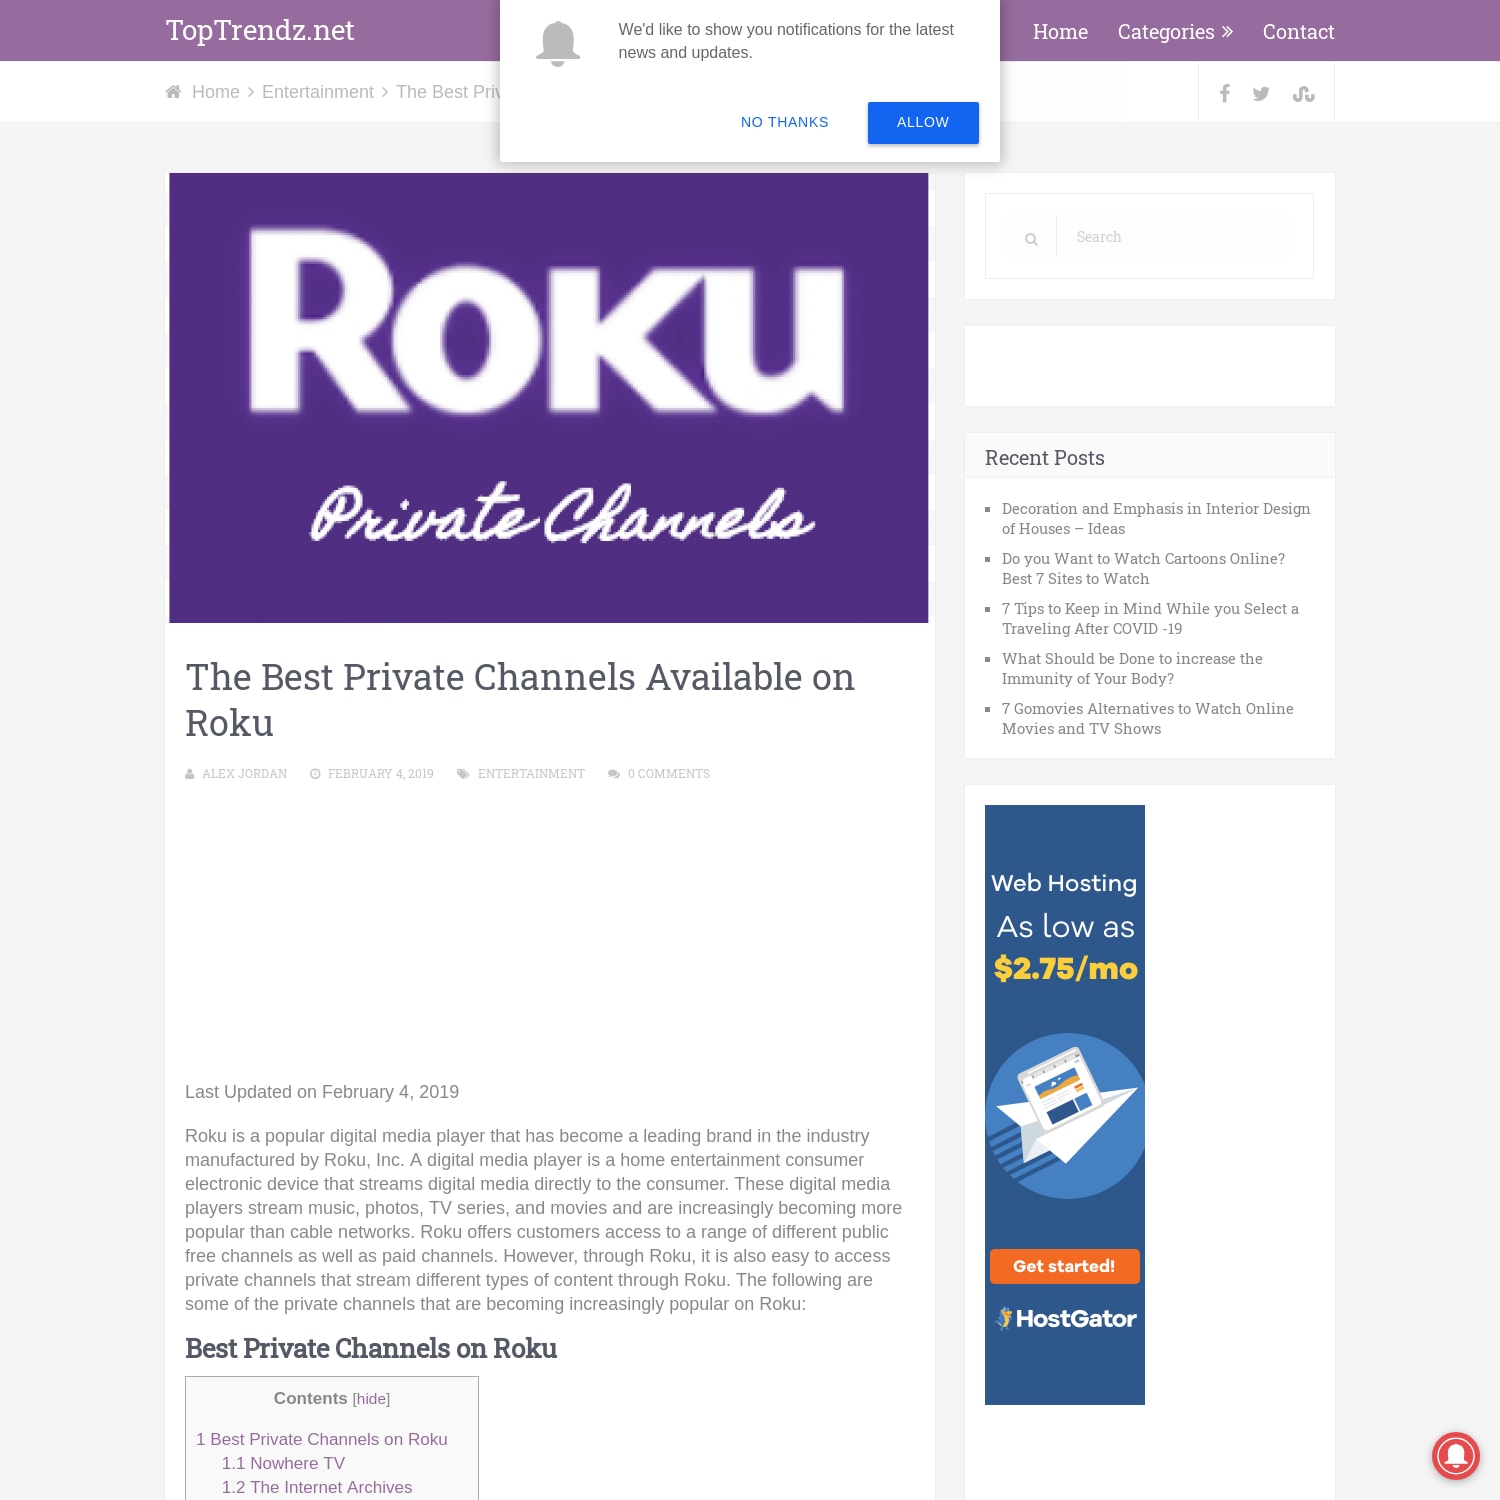 The Best Private Channels Available on Roku